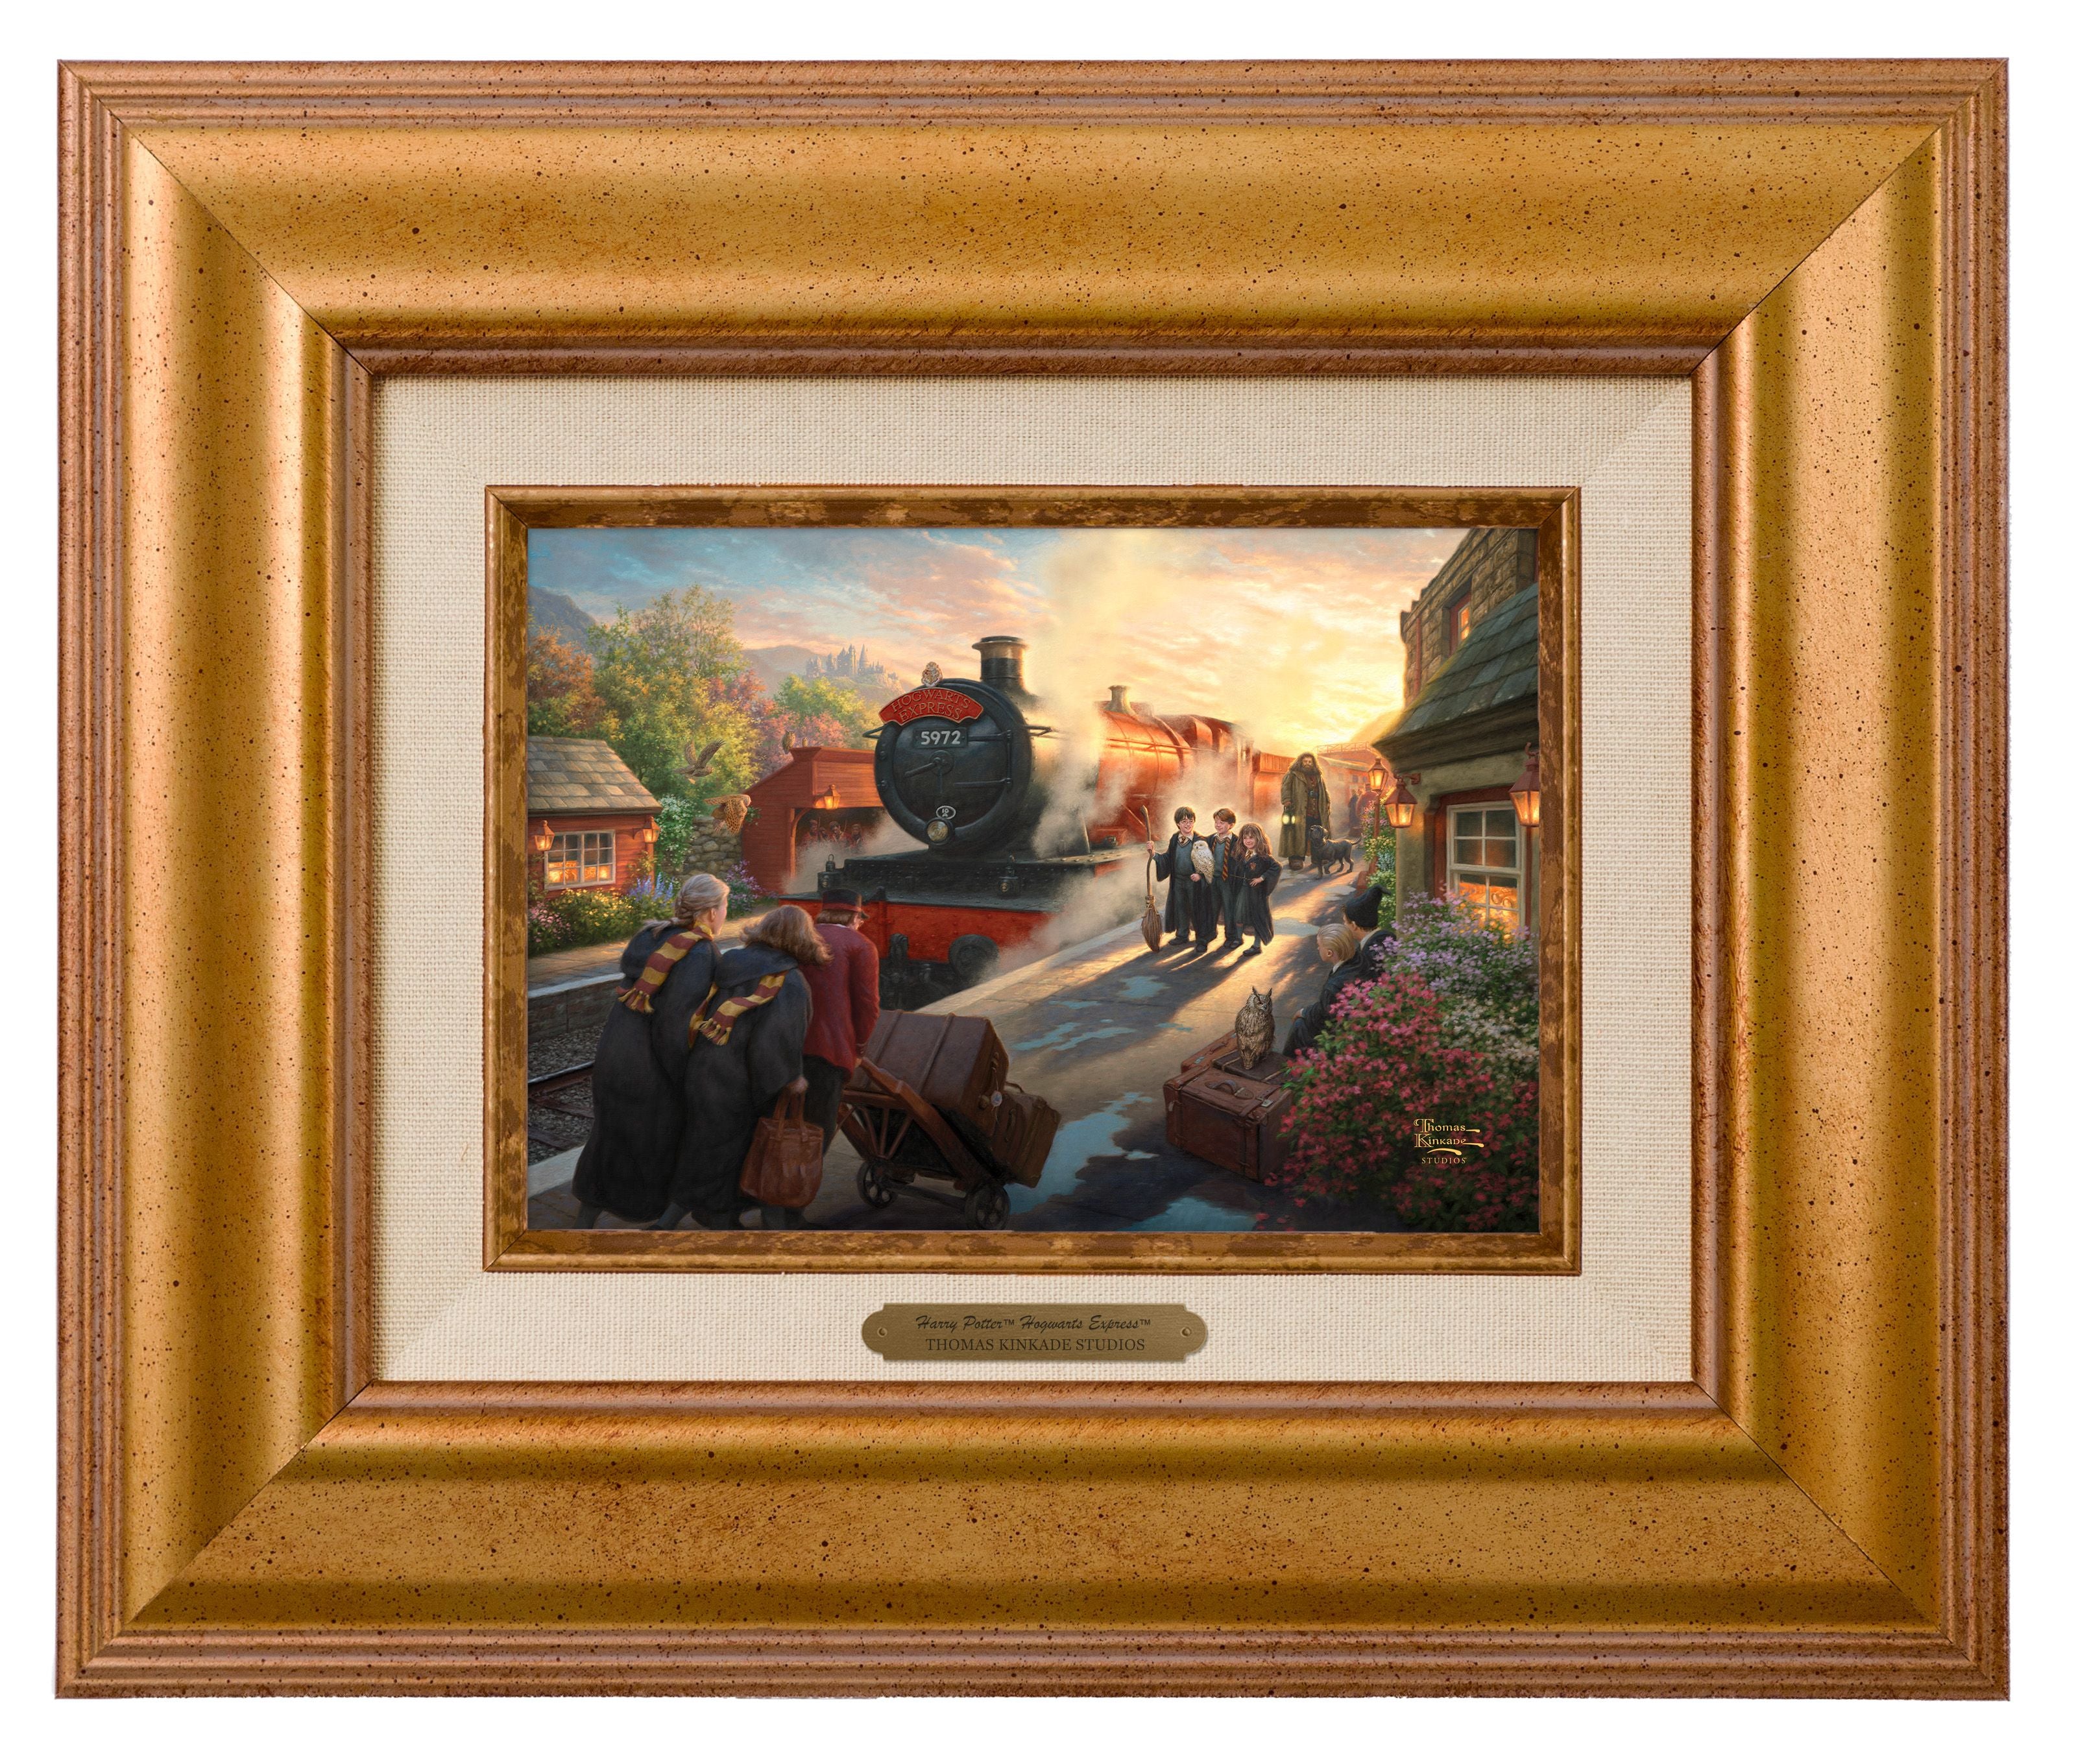 Rubeus Hagrid has come to collect Harry and travel with him to the school on the Hogwarts Express. Golden Sunset Frame